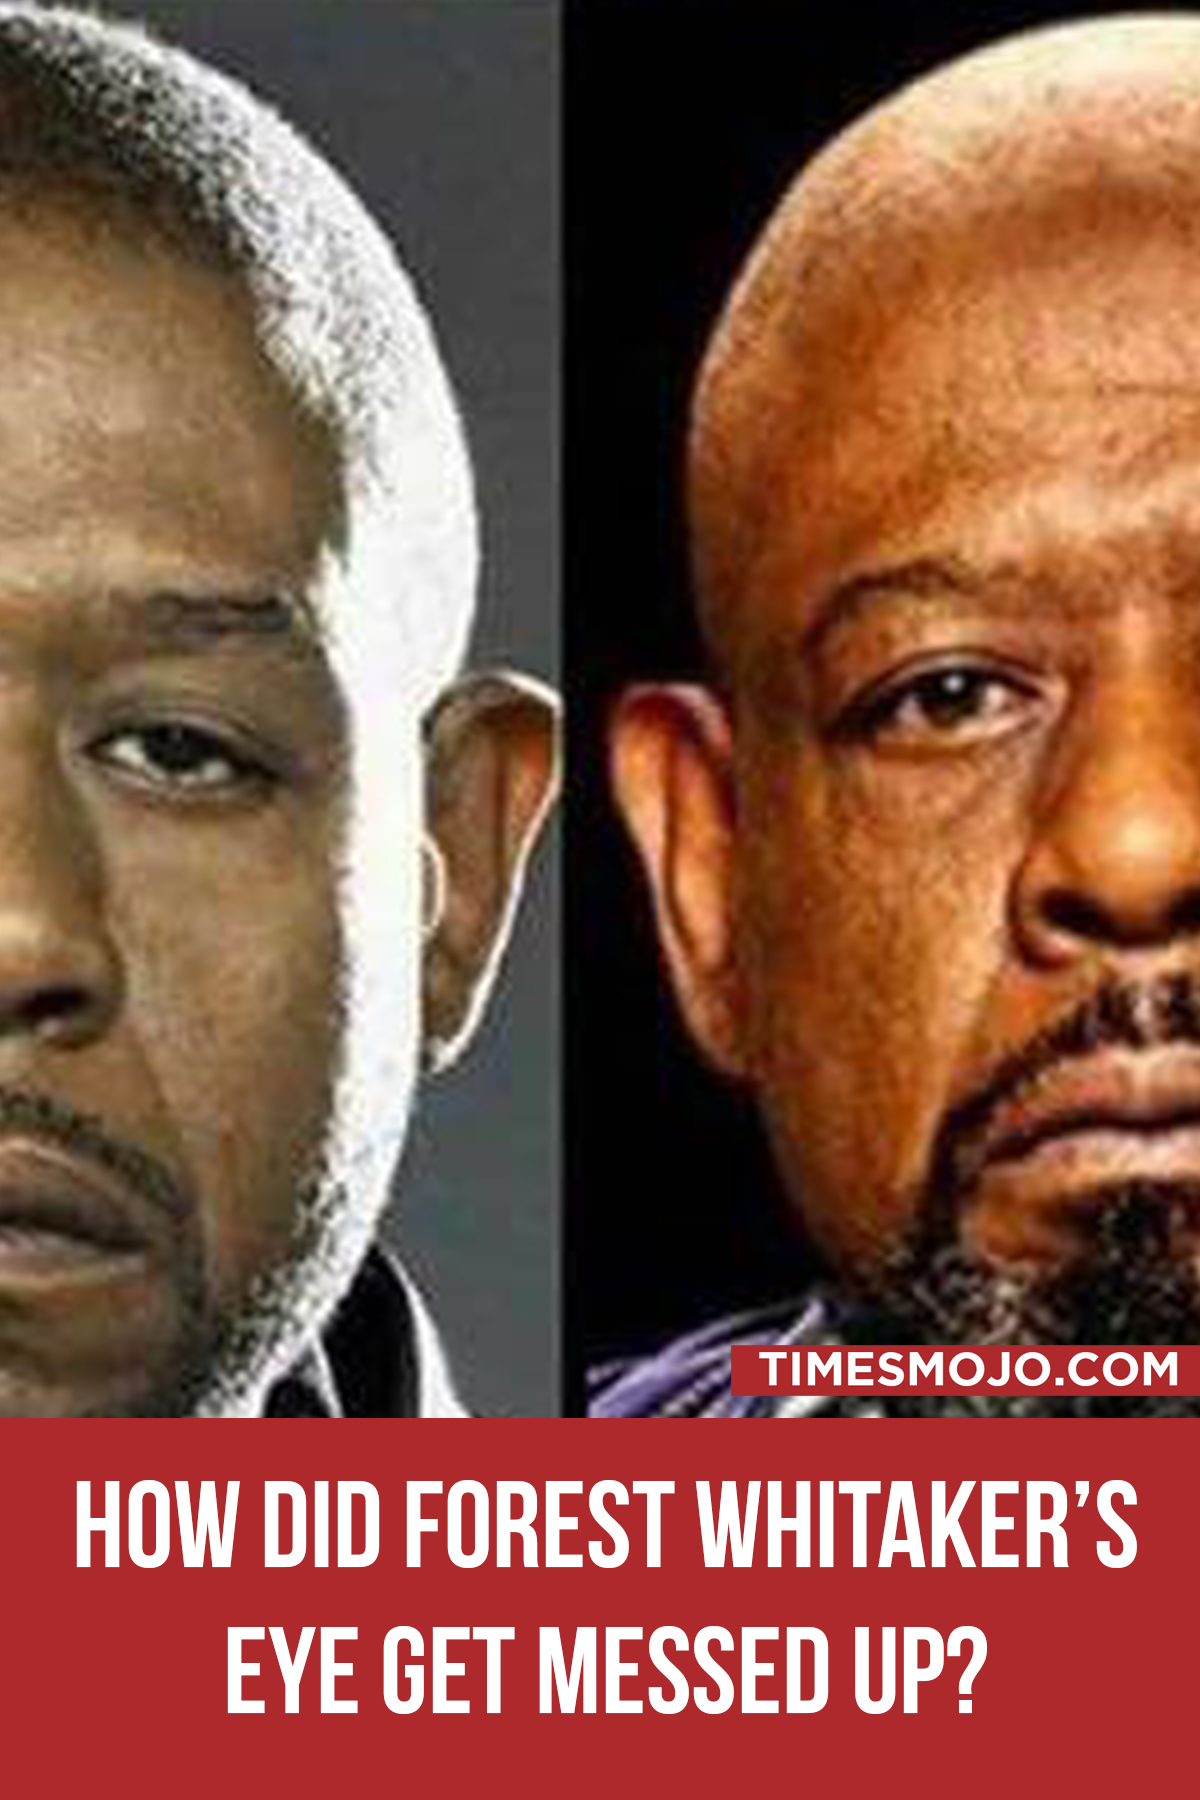 How Did Forest Whitaker’s Eye Get Messed Up